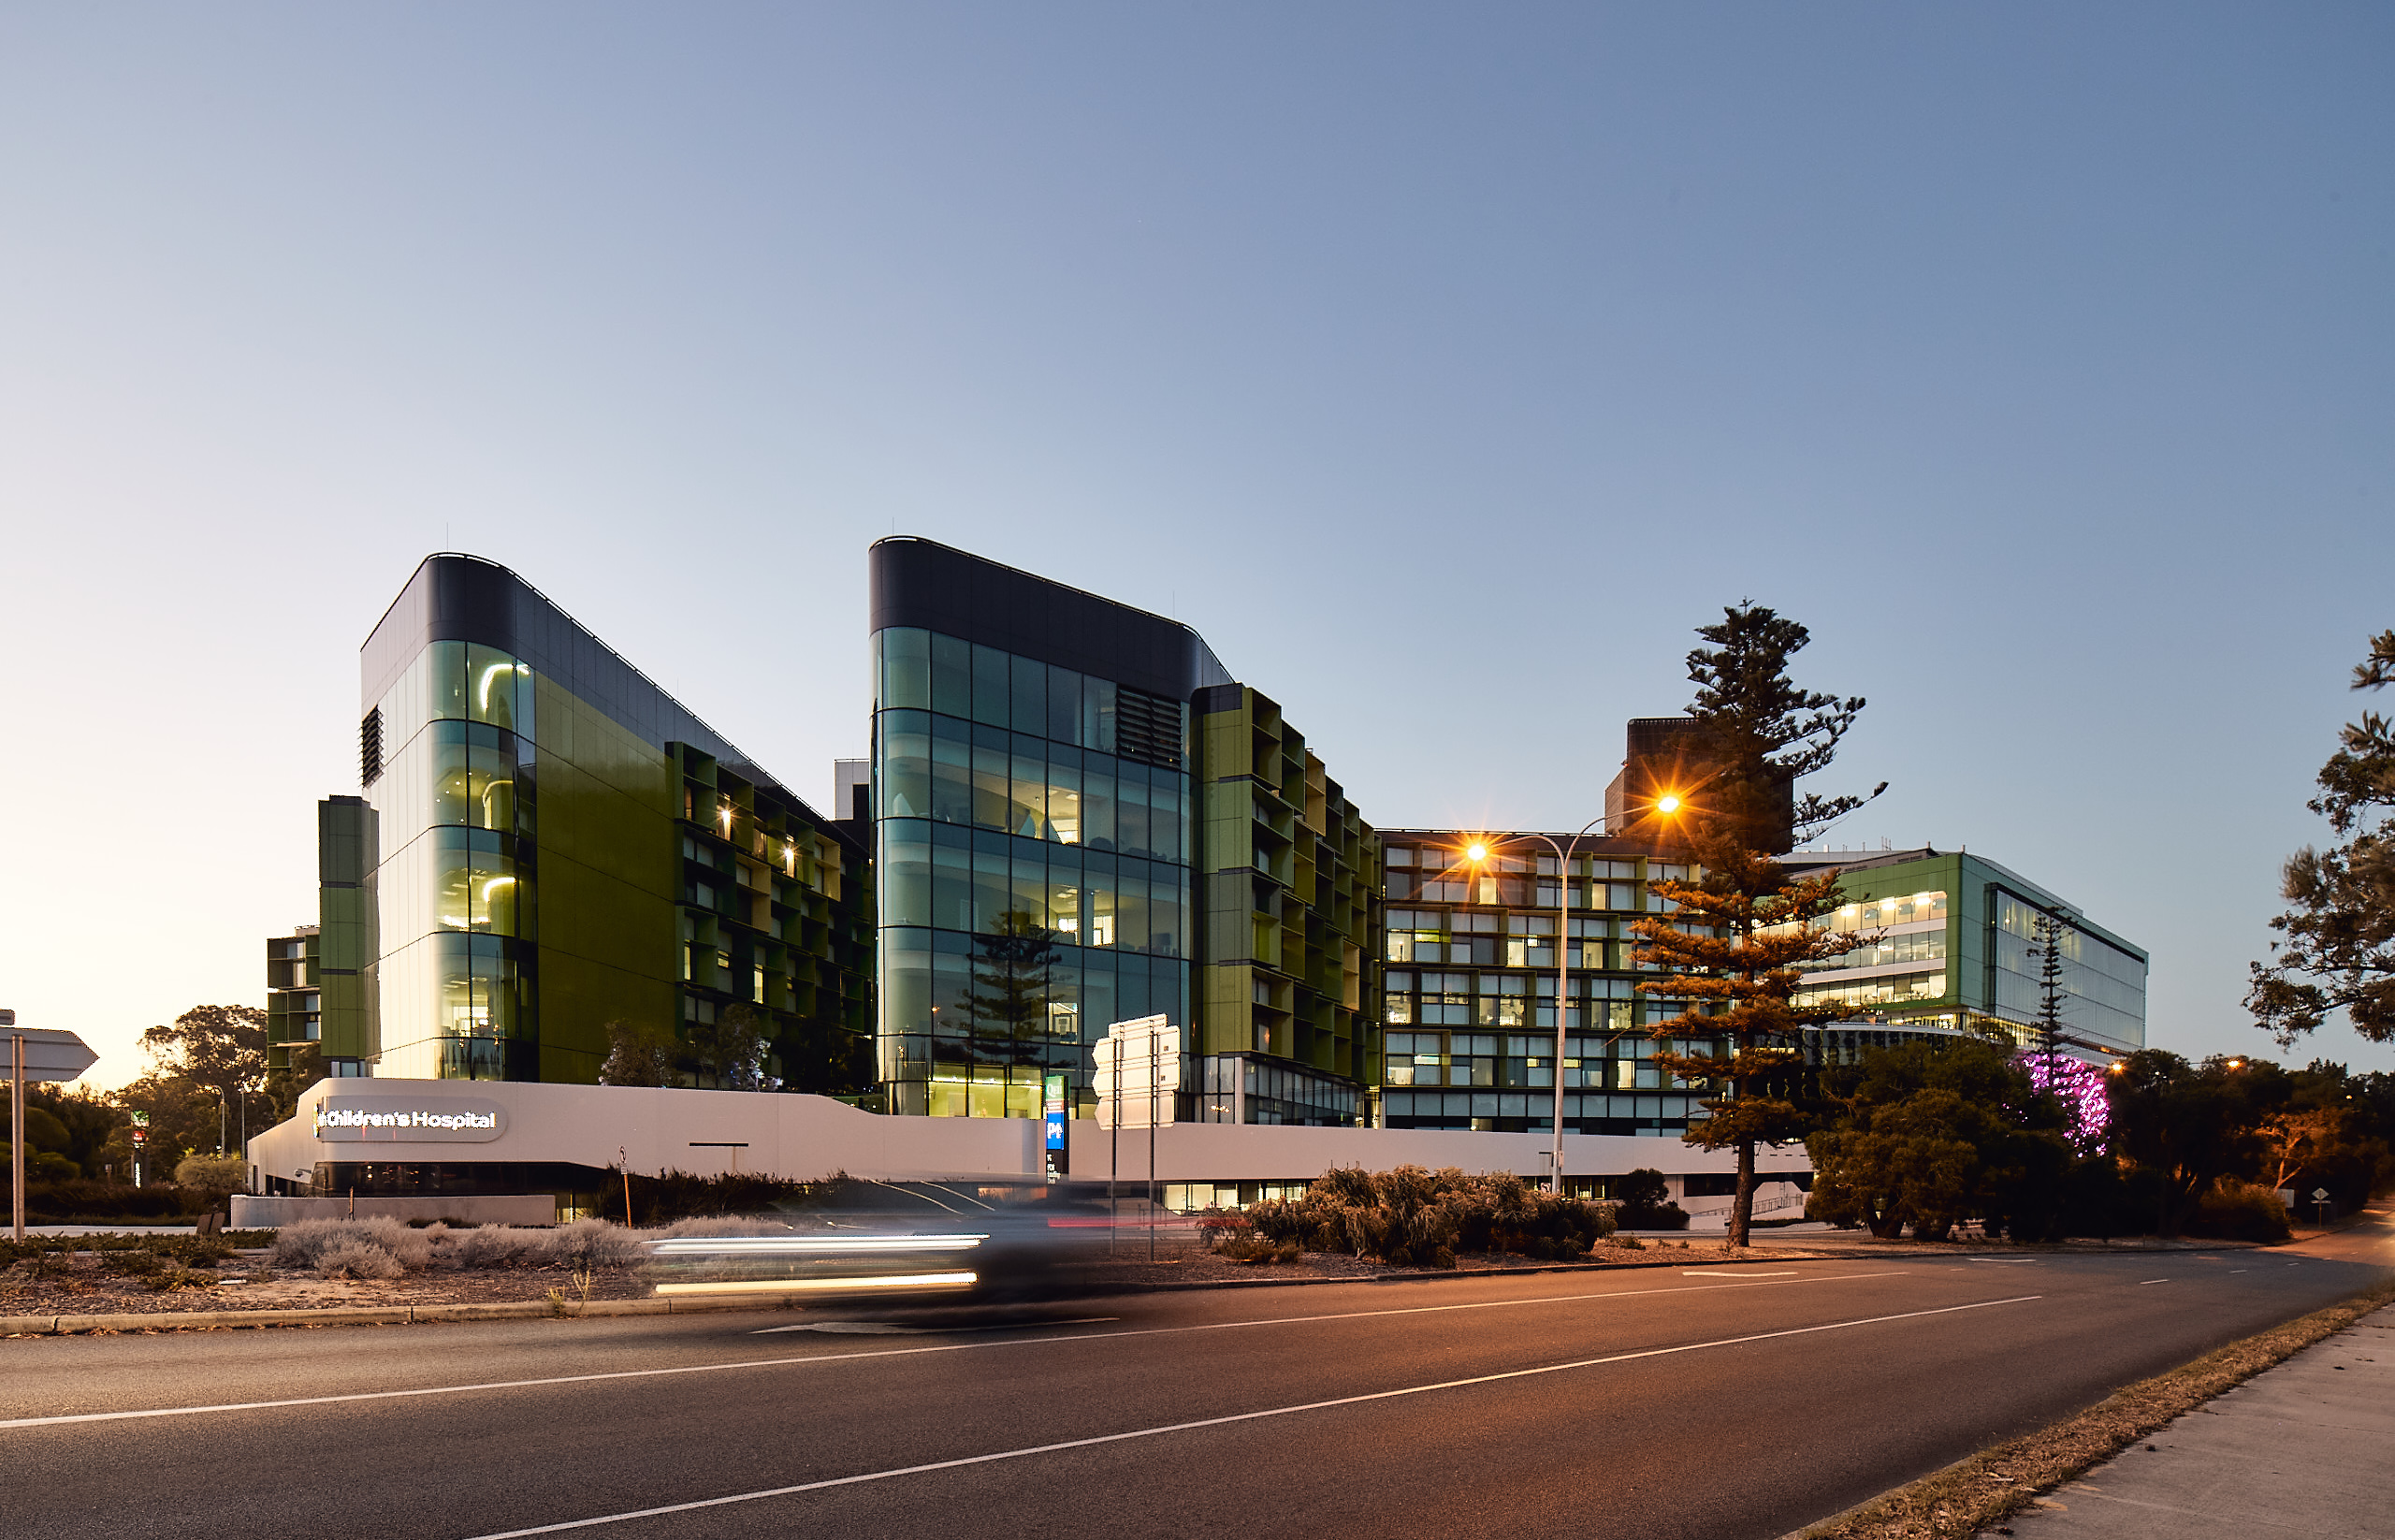 Perth Children's Hospital exterior from Winthrop Avenue